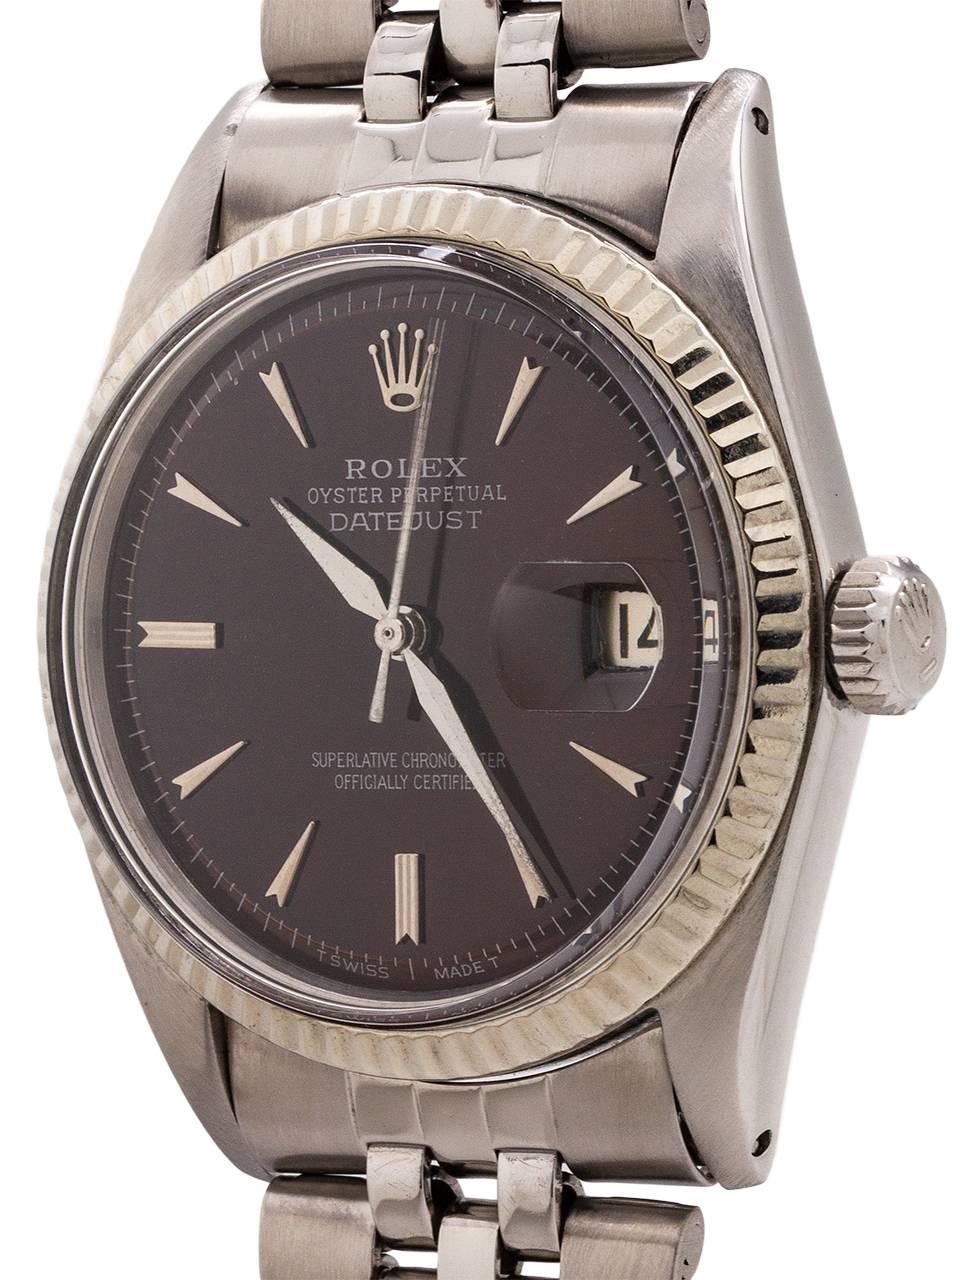 
Rolex Datejust ref 1601 serial # 952,xxx, circa 1963. Featuring a full size man’s 36mm diameter stainless steel case with 14K white gold fluted bezel and acrylic crystal. With a gorgeous custom  colored bronze dial, with applied tapered and faceted